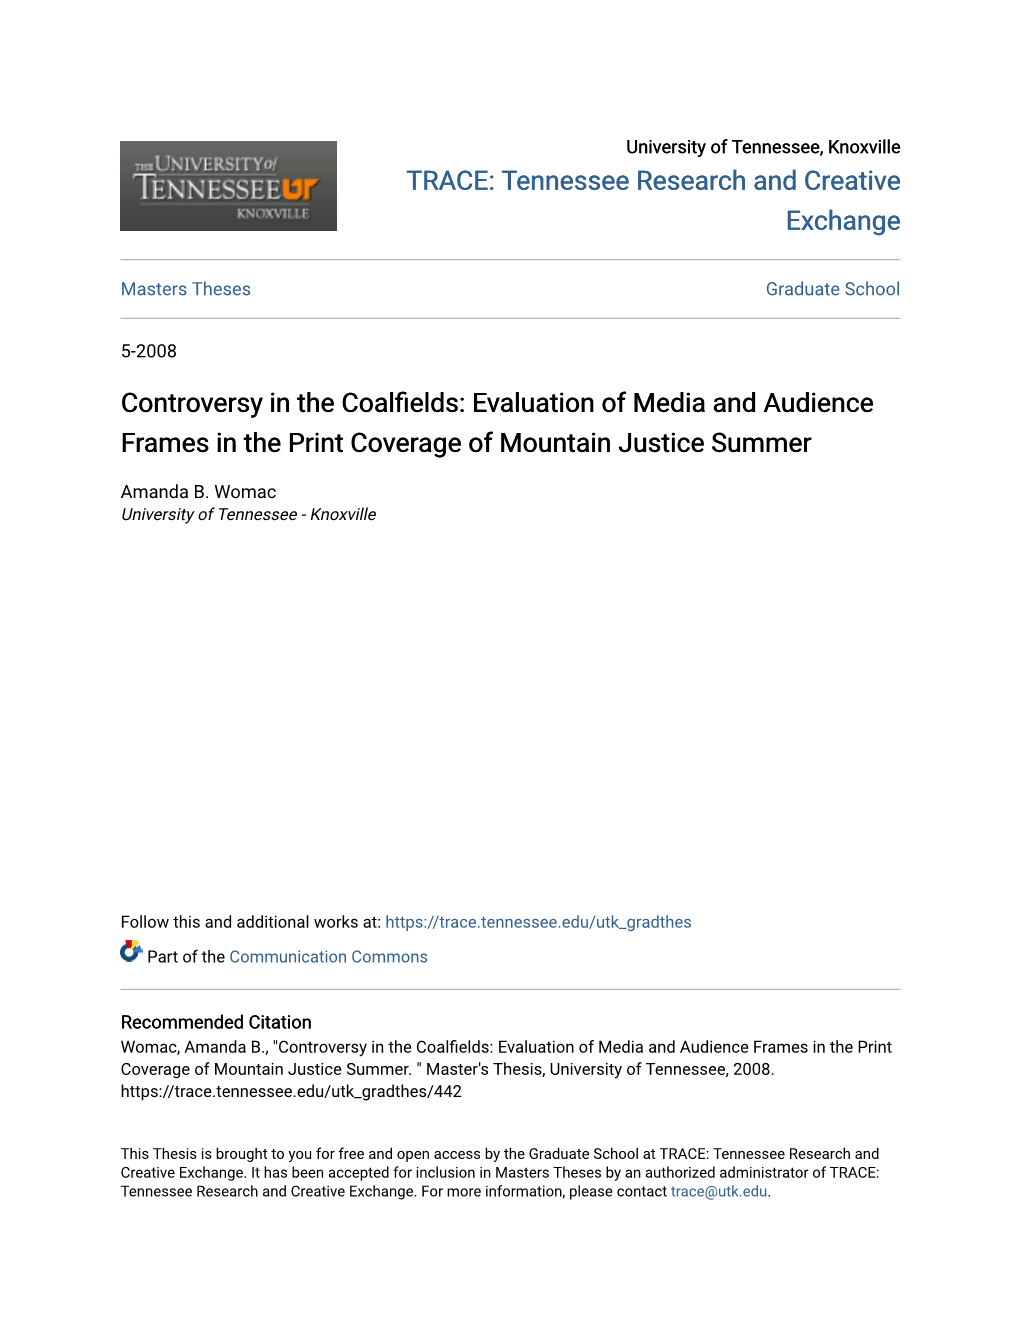 Evaluation of Media and Audience Frames in the Print Coverage Of